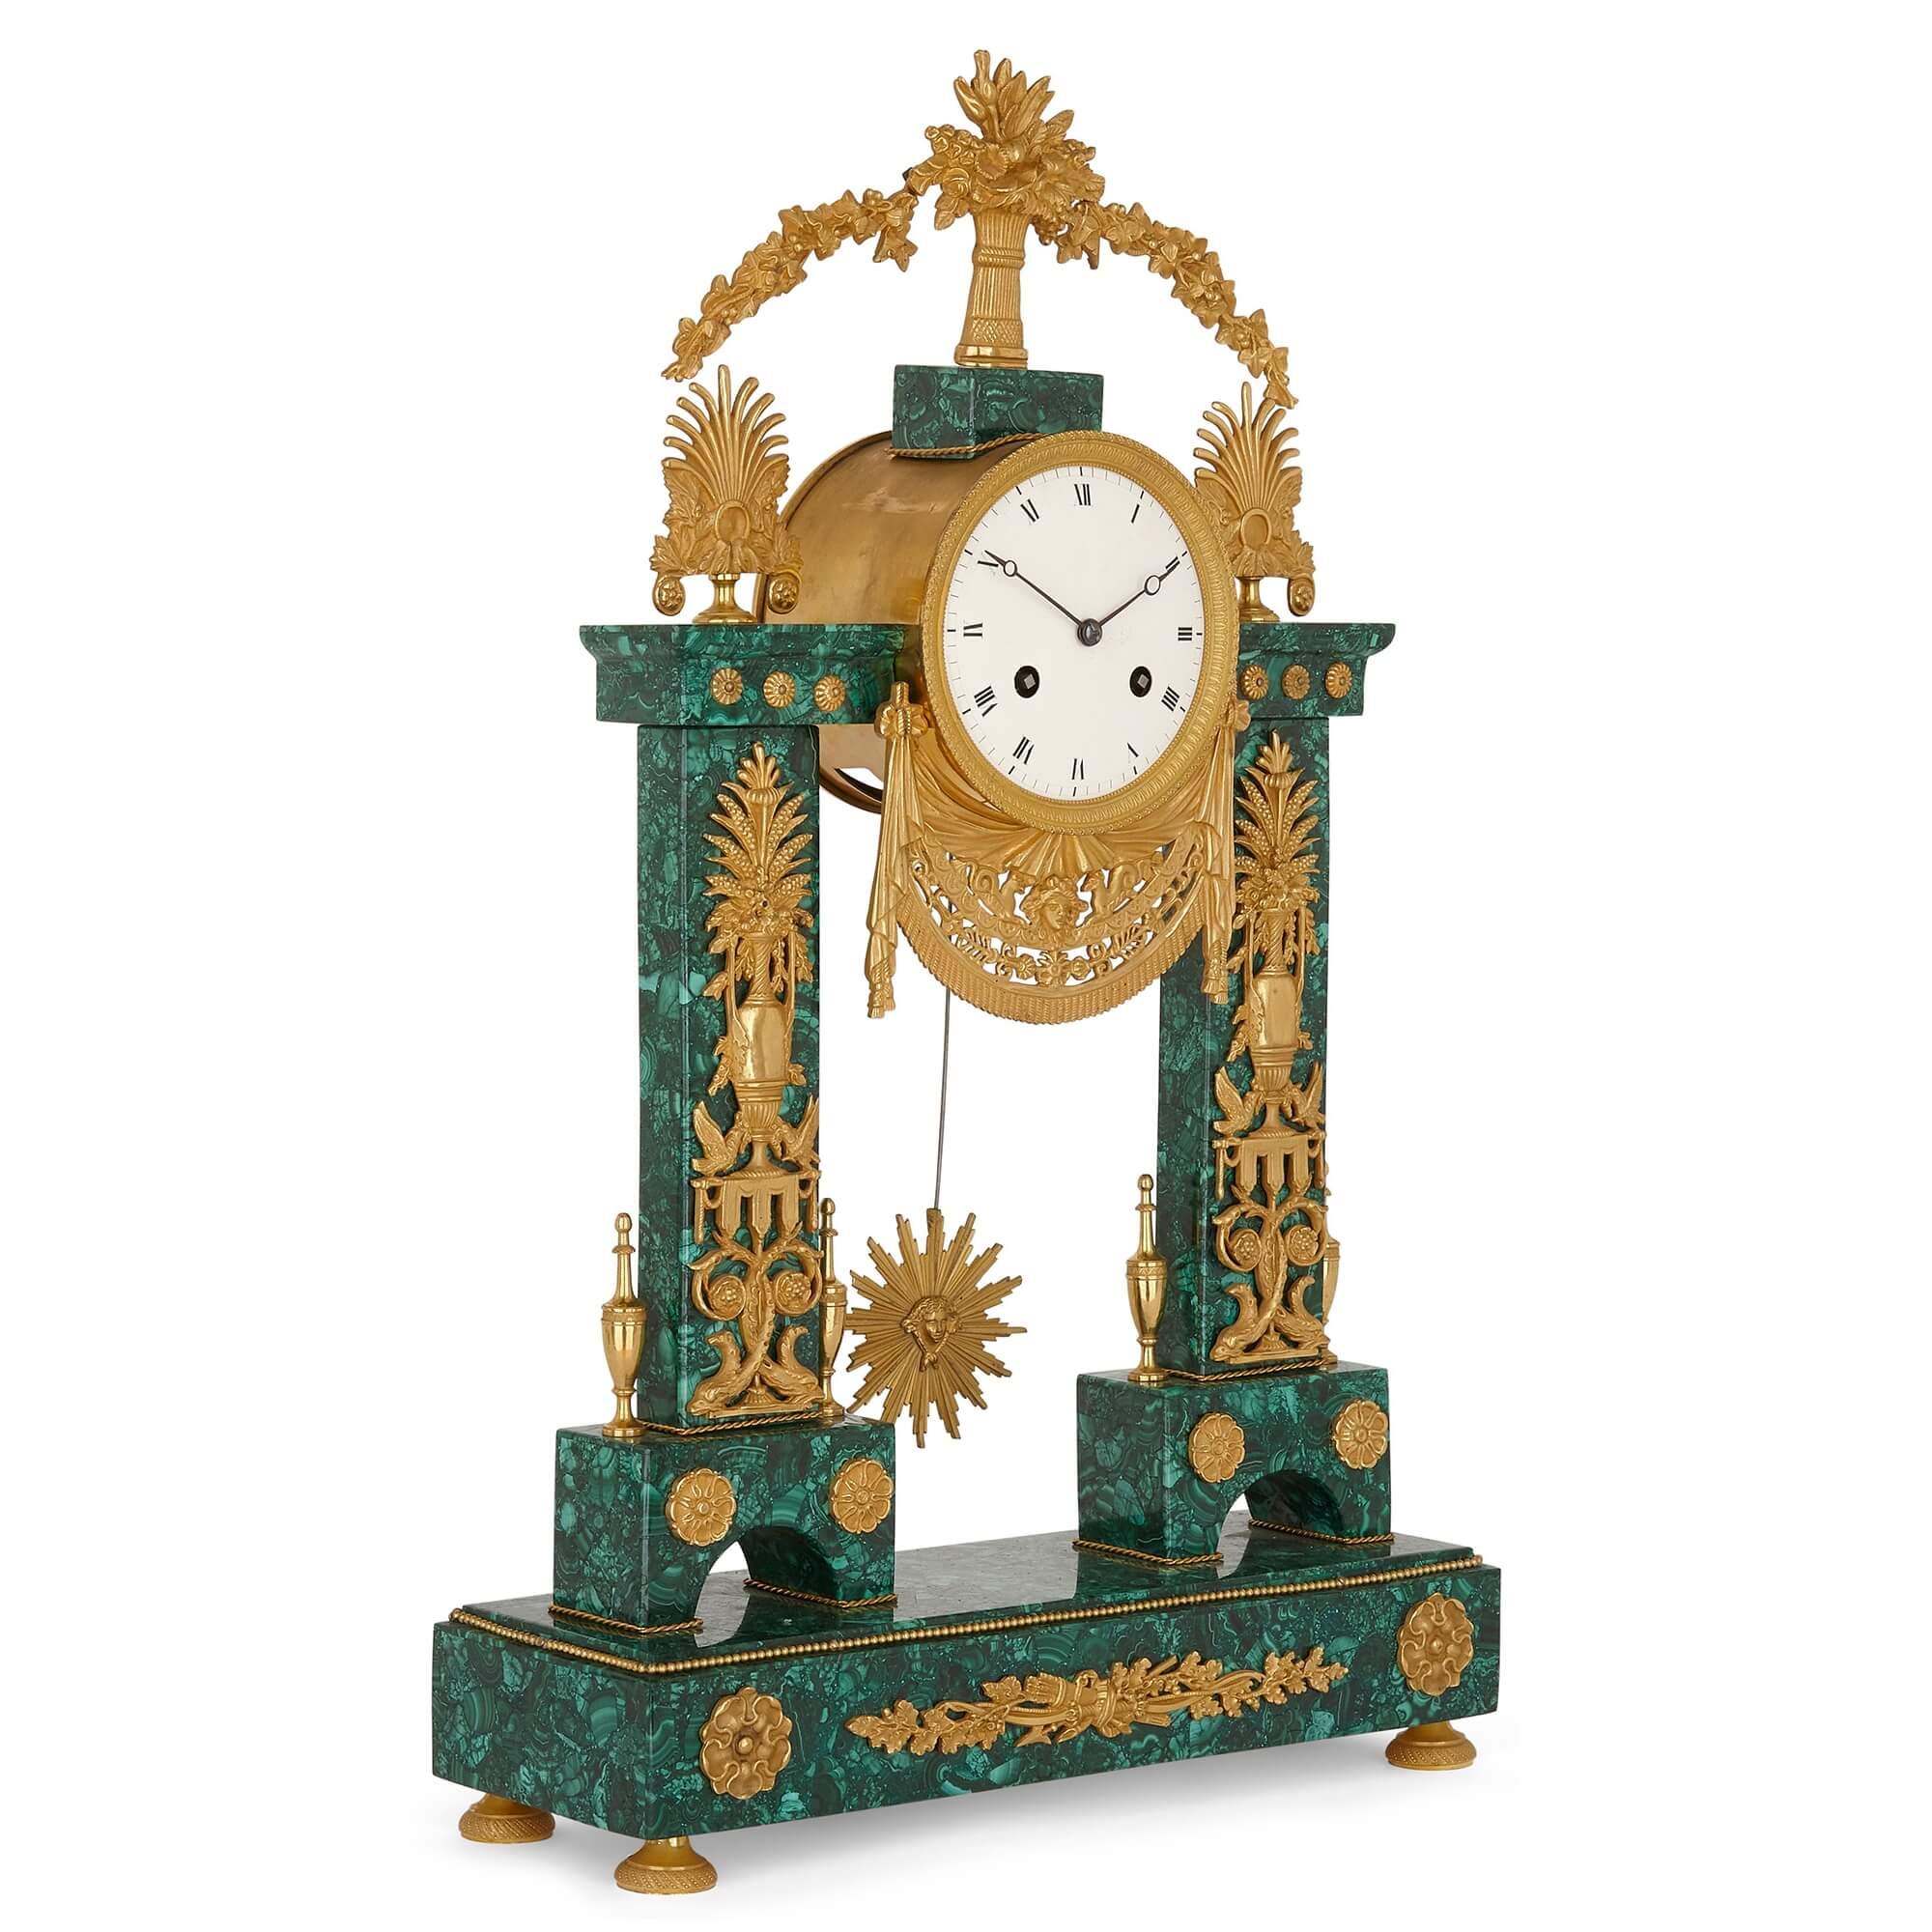 Antique Neoclassical Louis XVI gilt bronze and malachite clock
French, late 18th Century
Measures: Height 56cm, width 35cm, depth 12cm

Crafted from gilt bronze and a later malachite veneer, this refined Louis XVI period mantel clock is designed